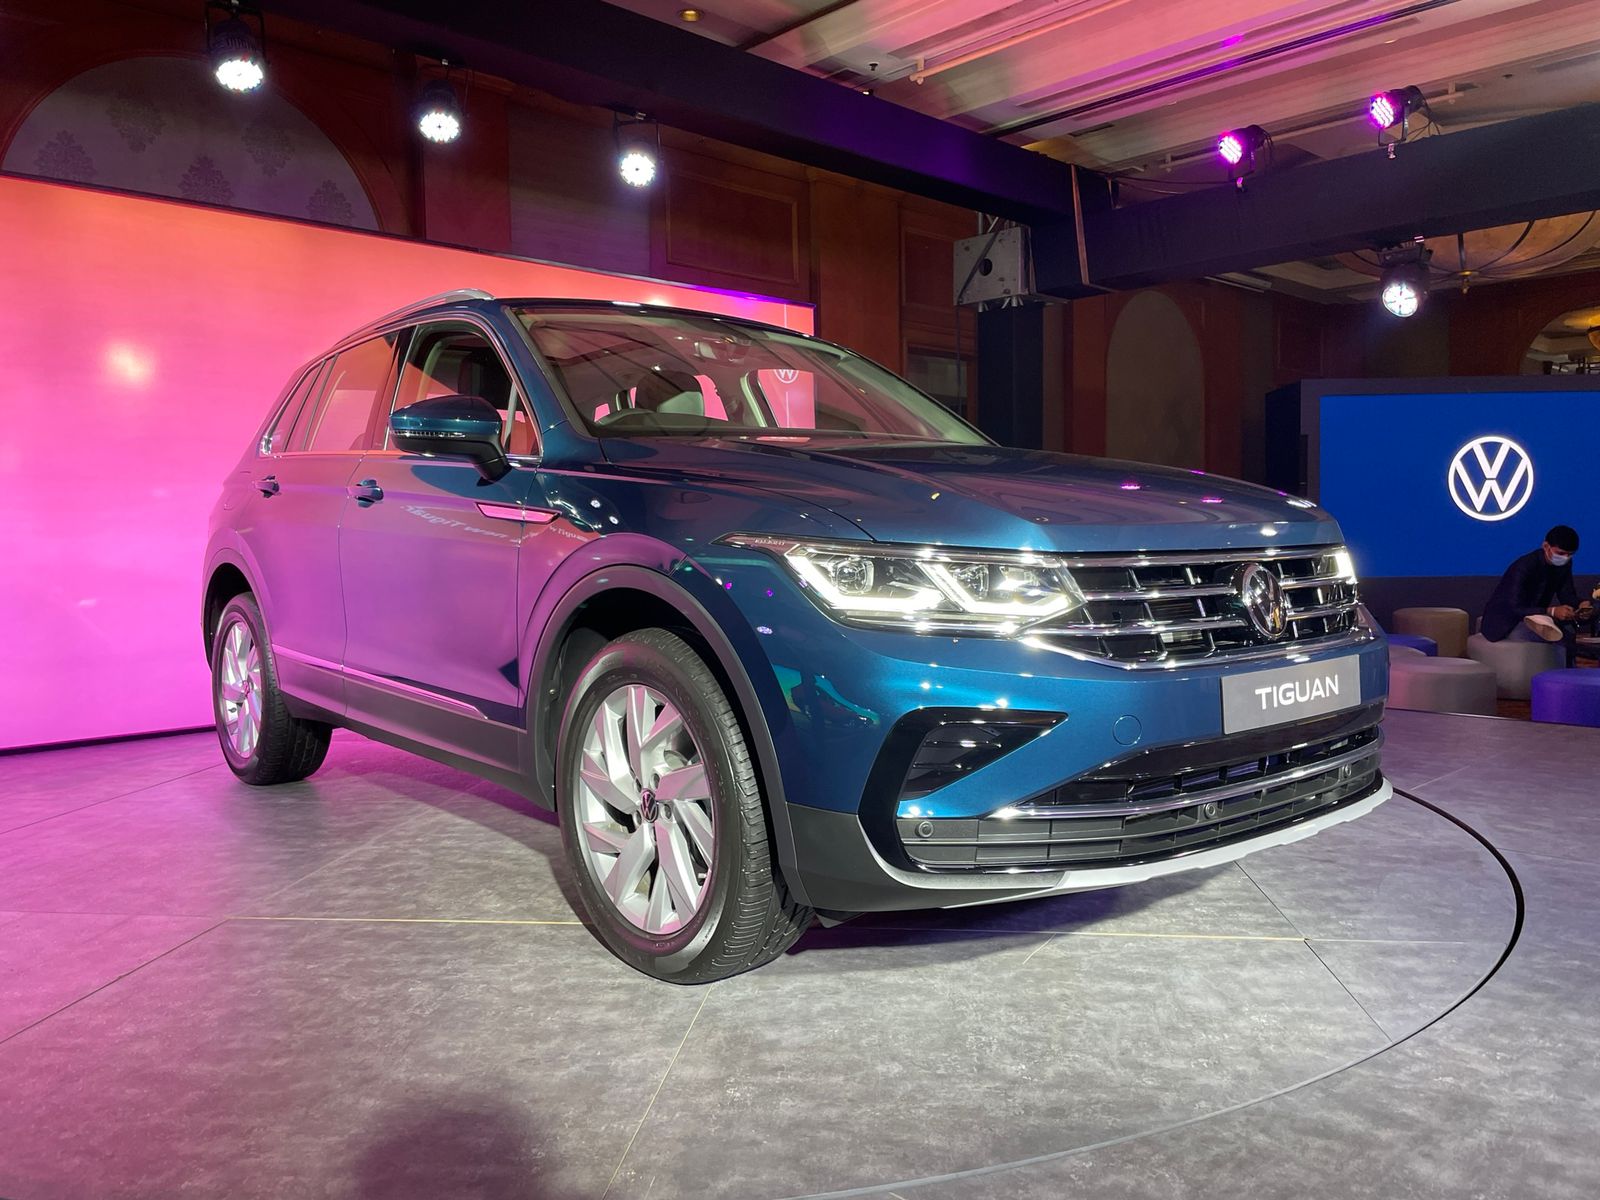 New Volkswagen Tiguan First Look Review - Full Specifications & Features